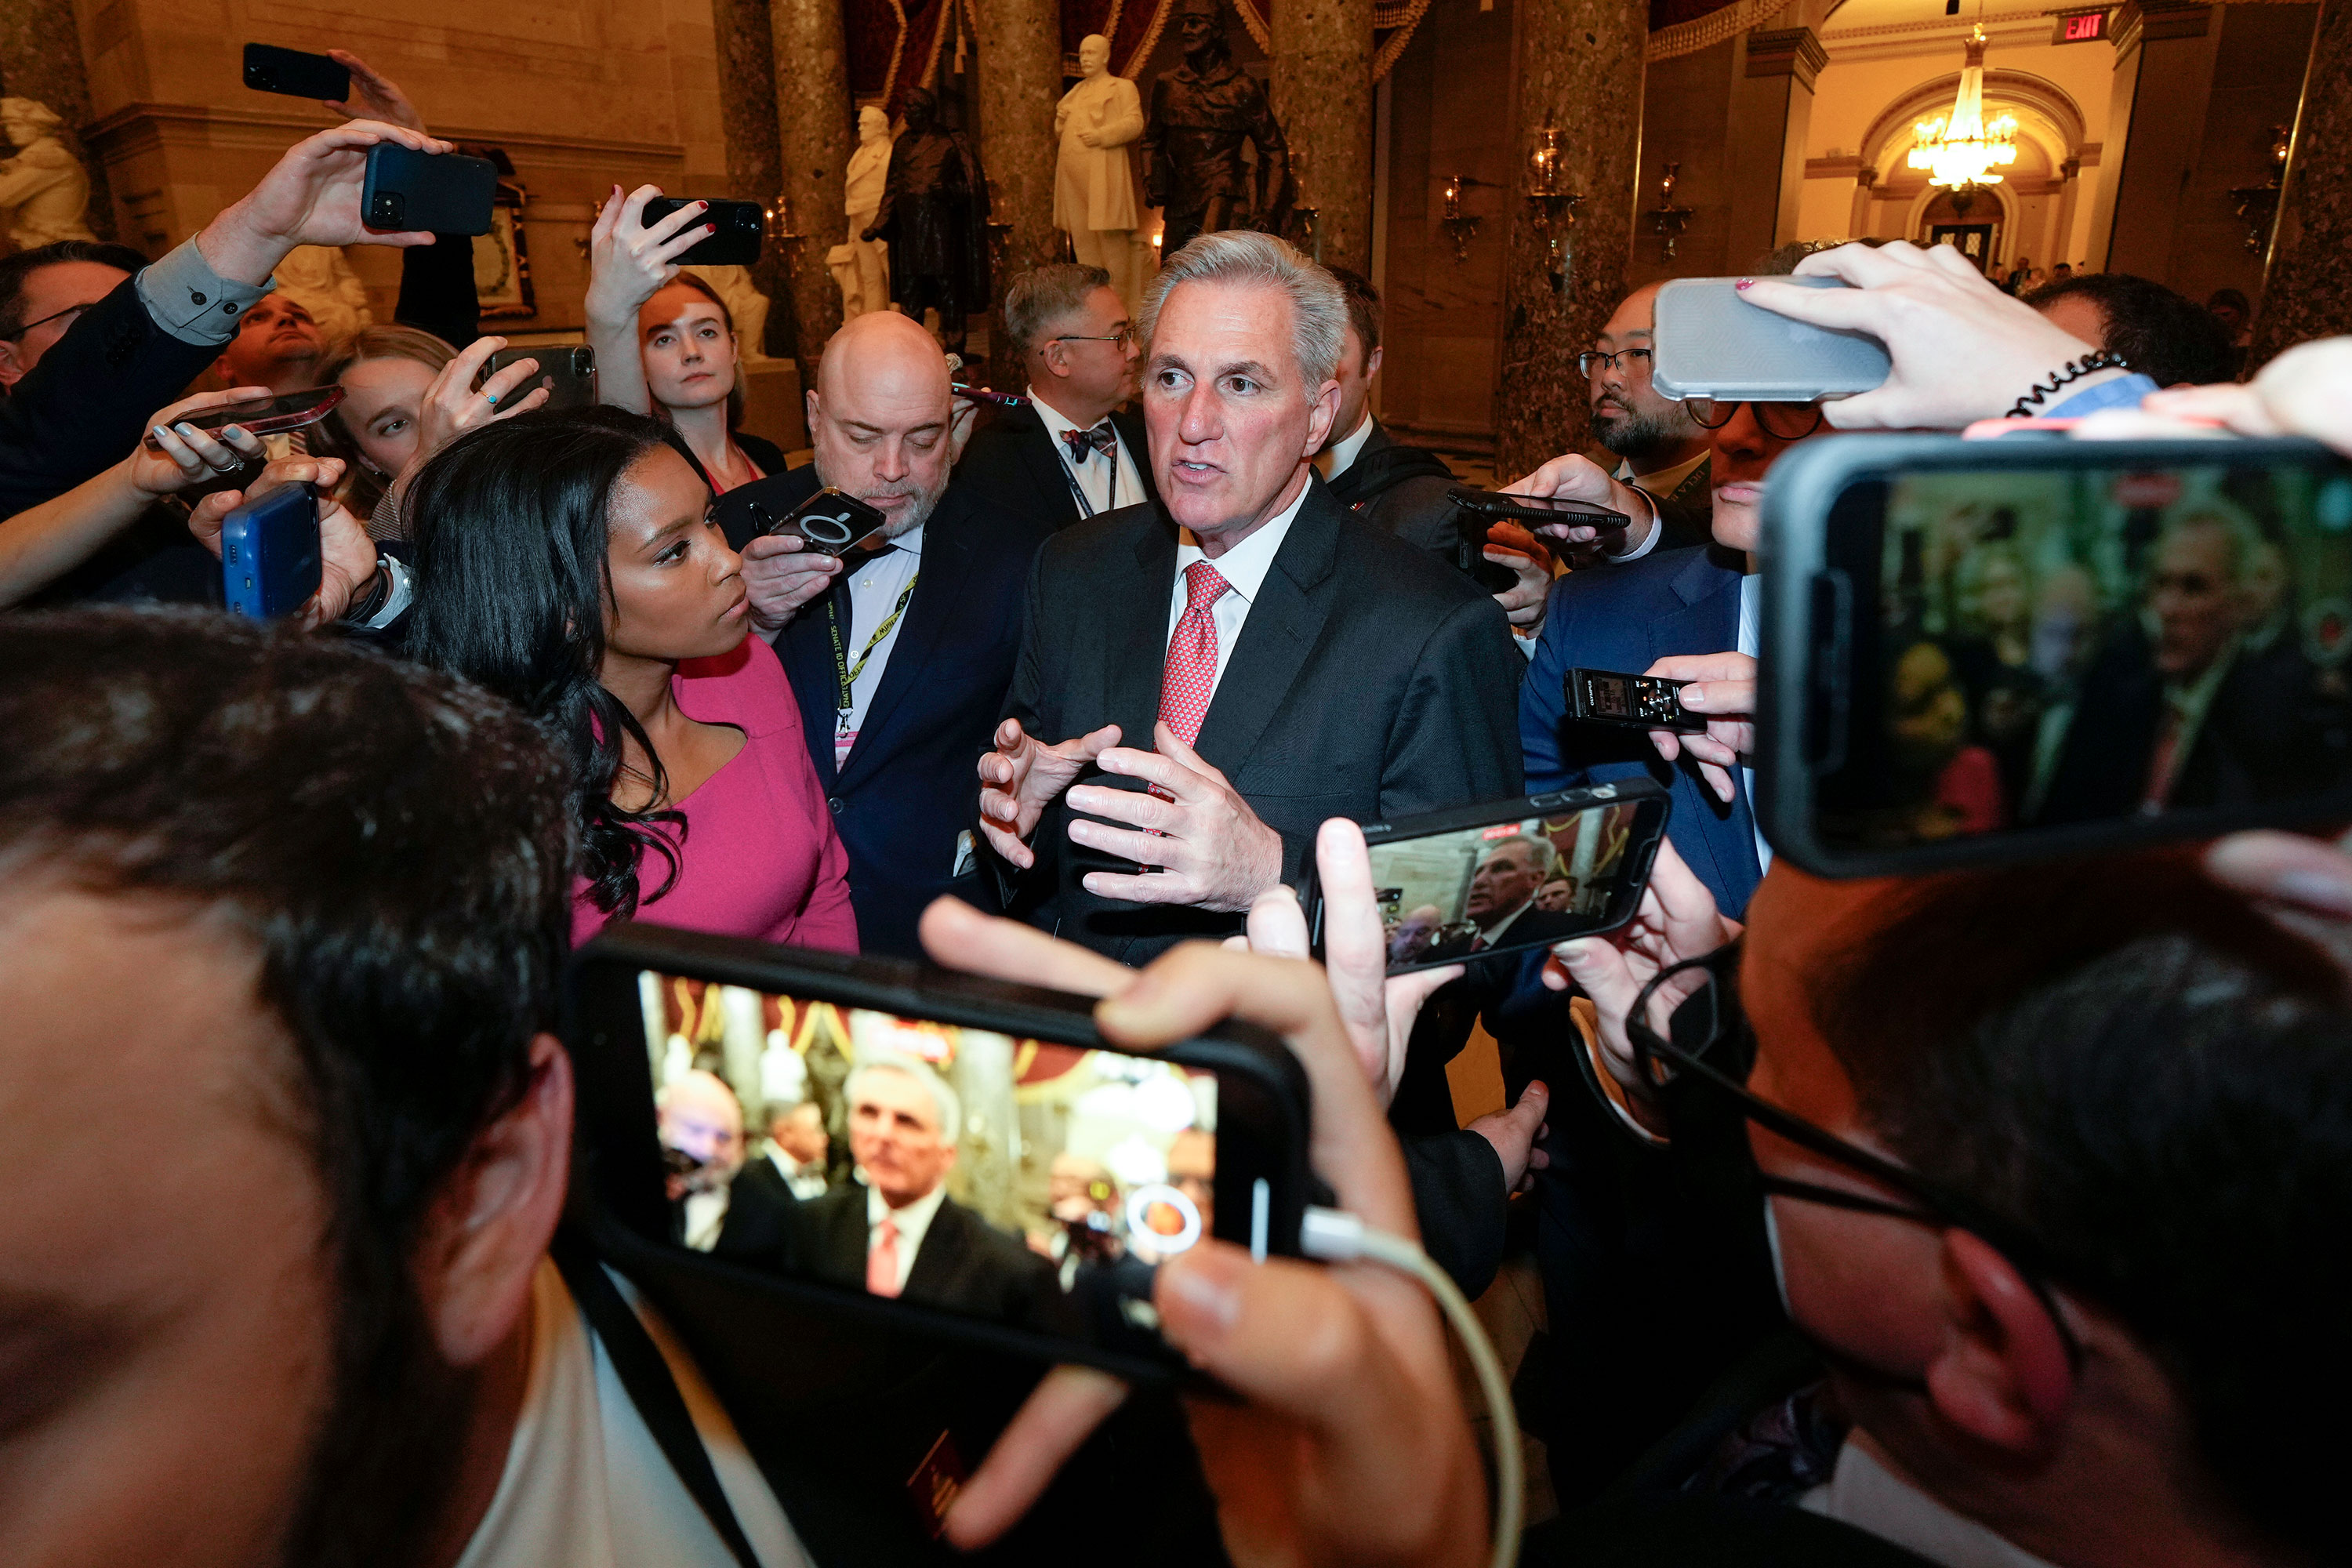 McCarthy: “We’re going to make progress today — we’re going to shock you”